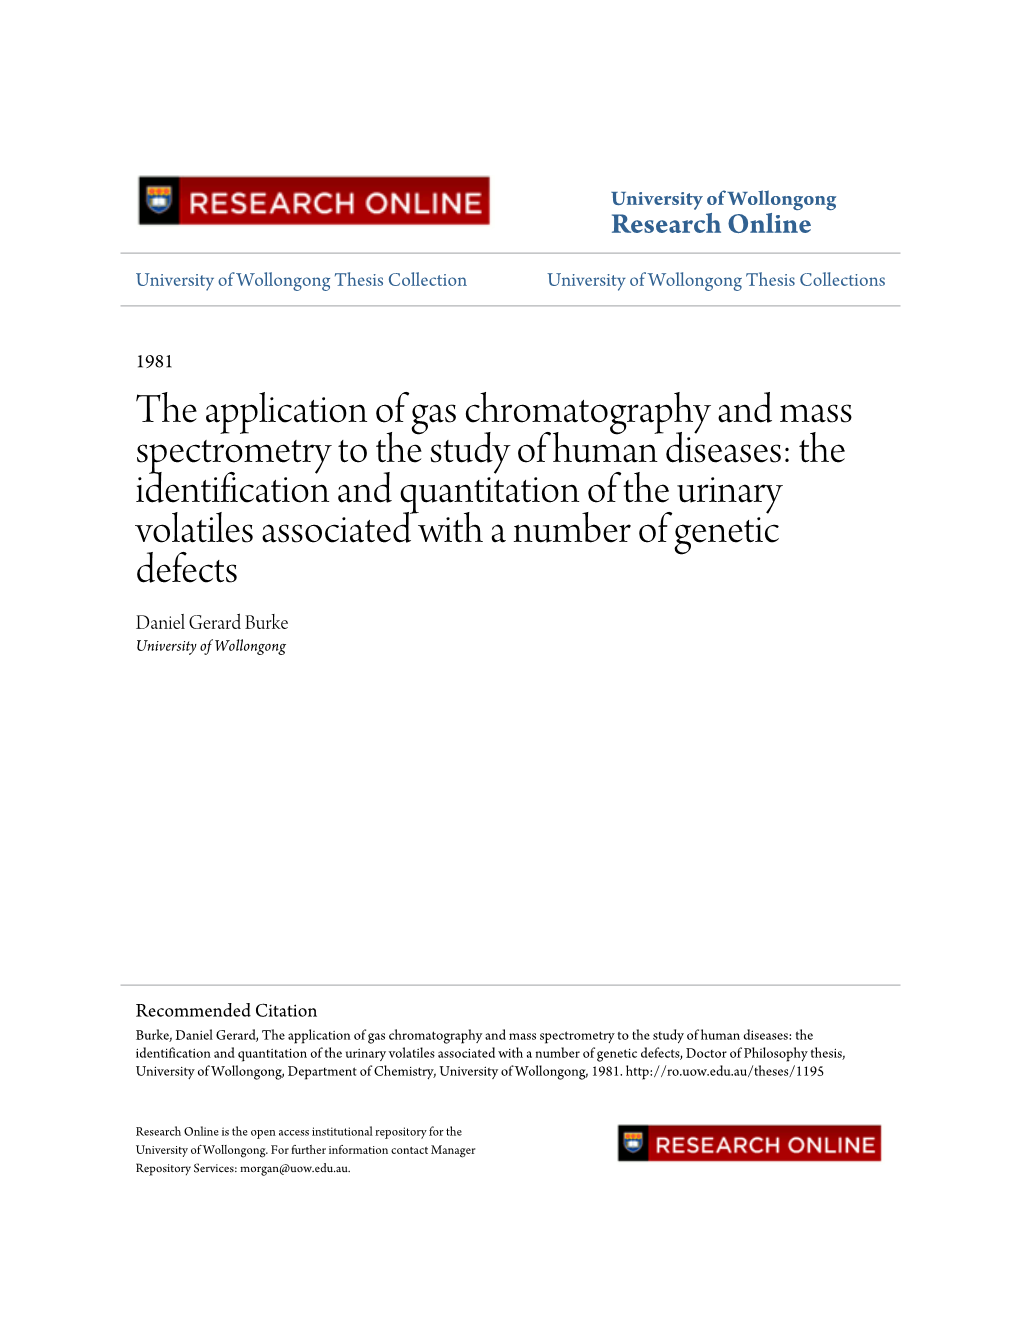 The Application of Gas Chromatography and Mass